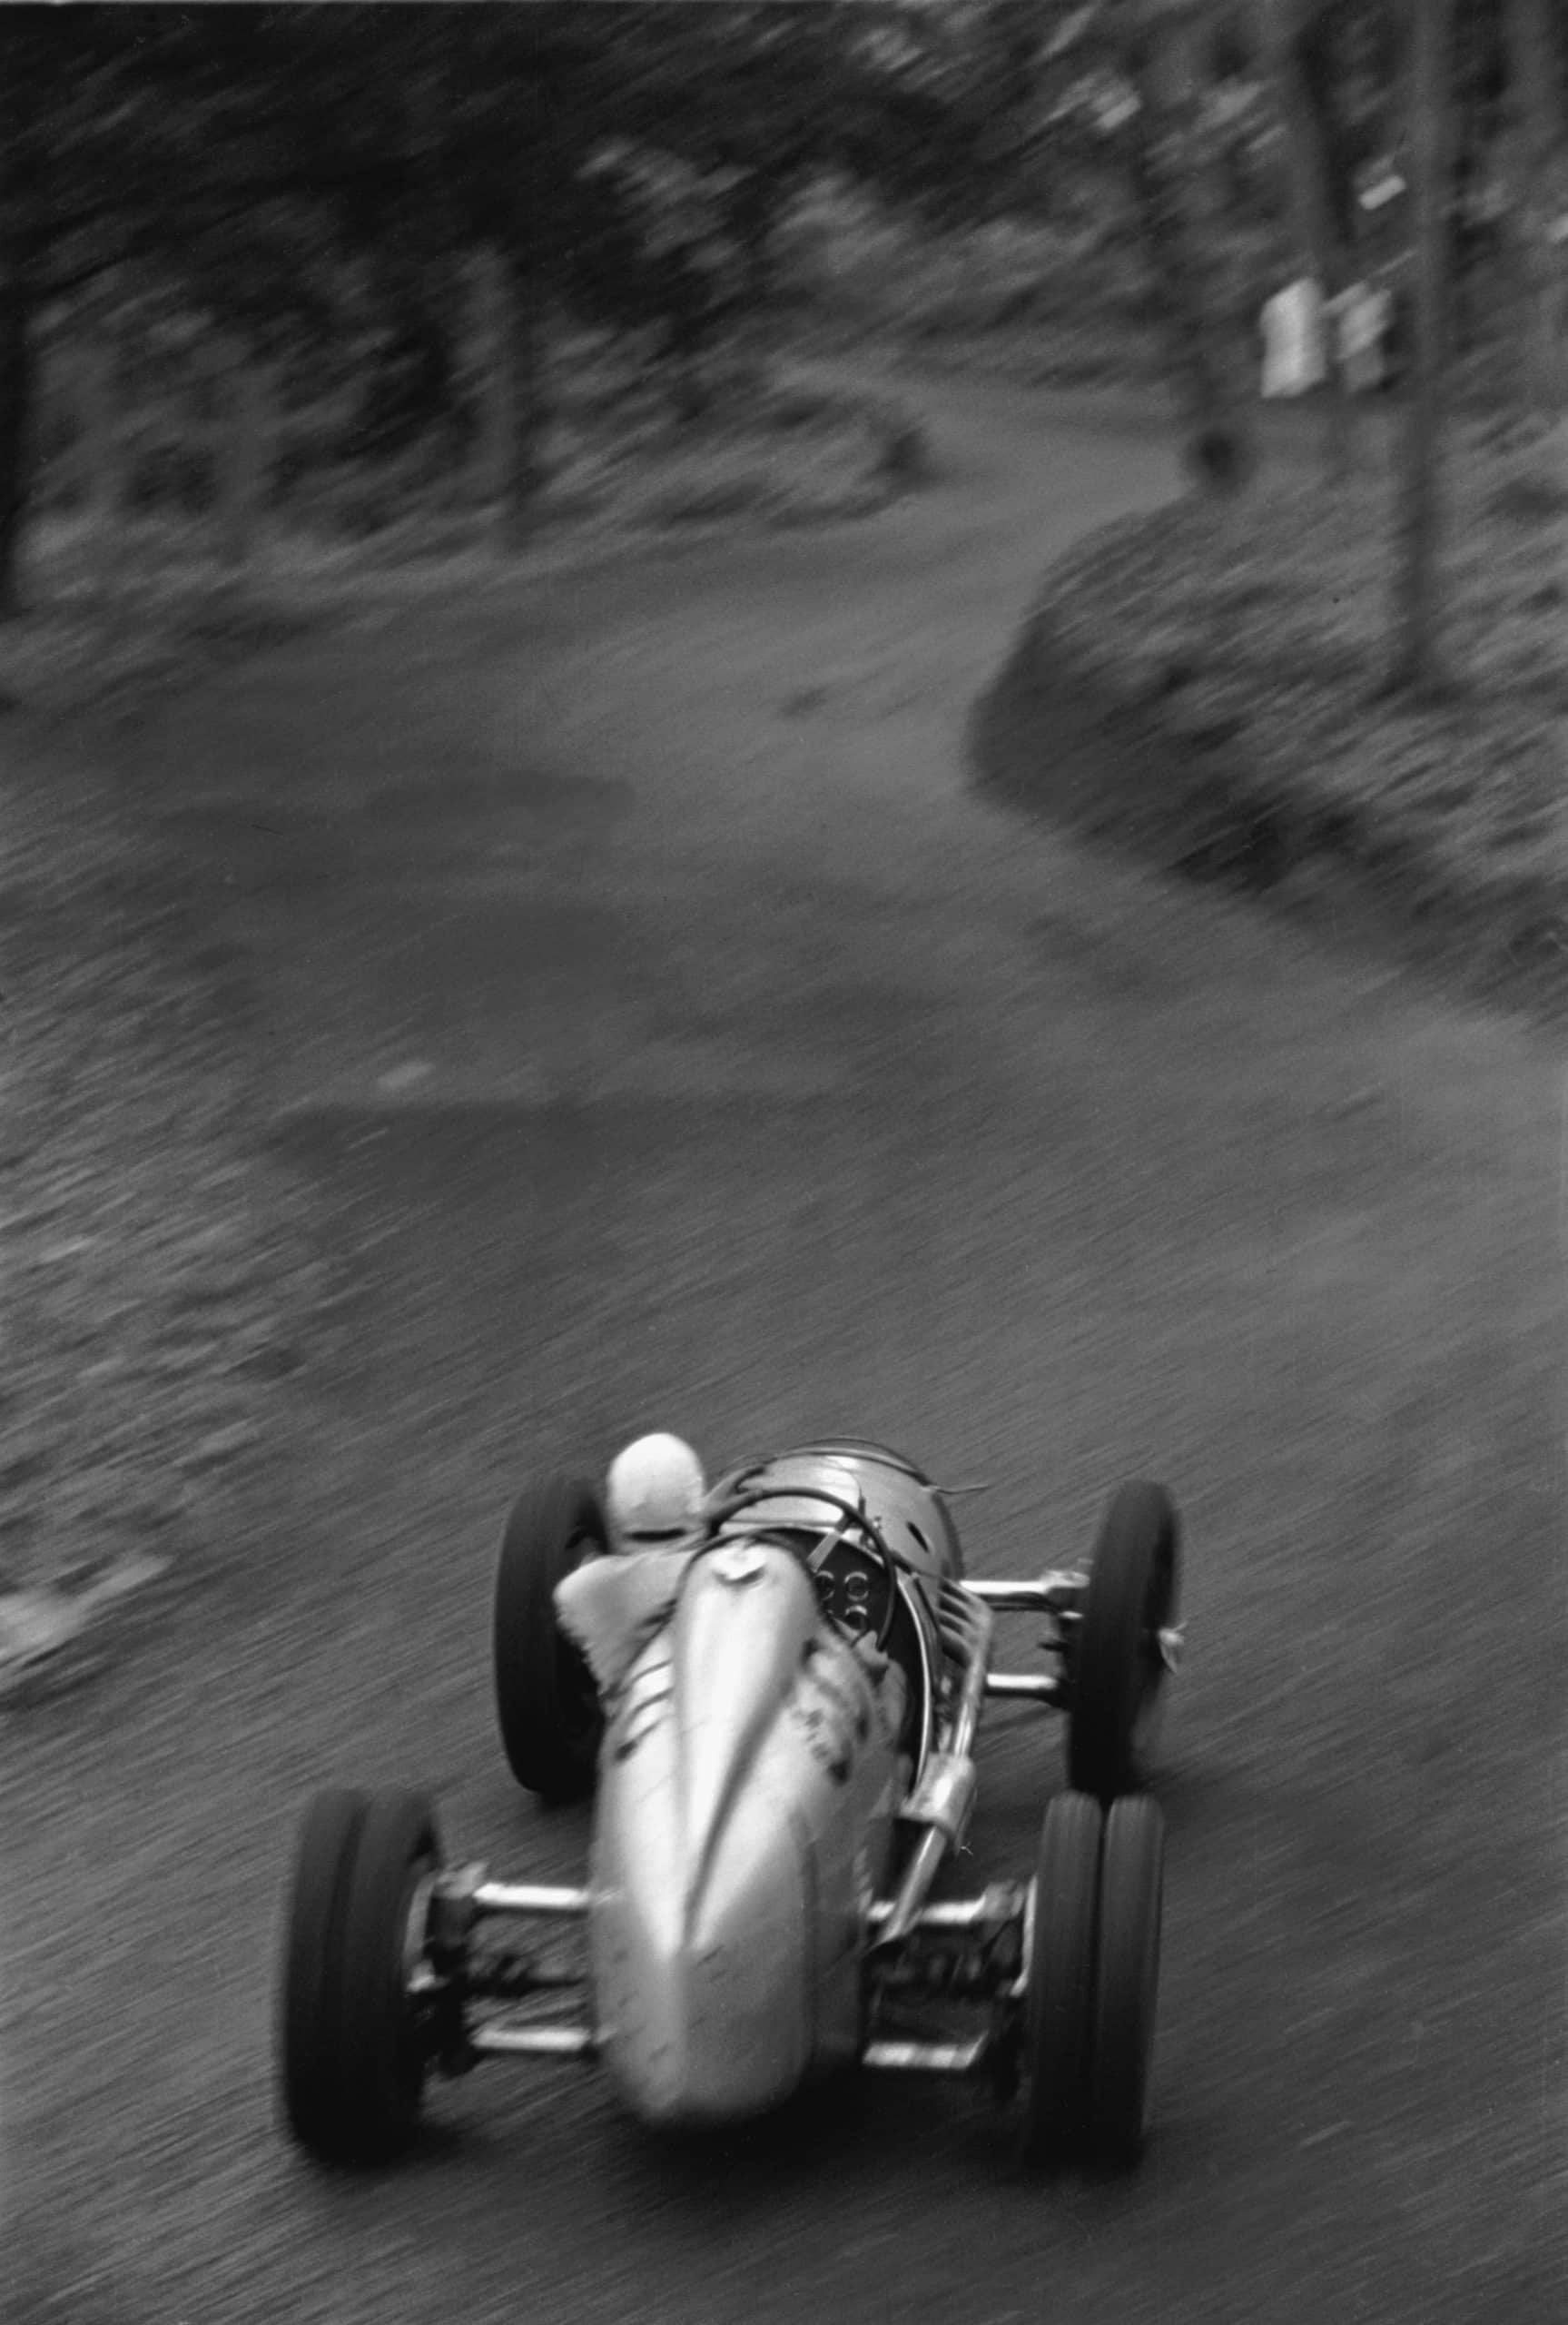 Prescott Hill-Climb, May 14, 1939. George Abecassis roars up into the Esses in his two-liter Alta. In this photo one can see the twisting road ahead and the slide of the car caught by the driver. Much is blurred by motion, but the steeringwheel is in perfect focus. (Photo by Klemantaski Collection/Getty Images)